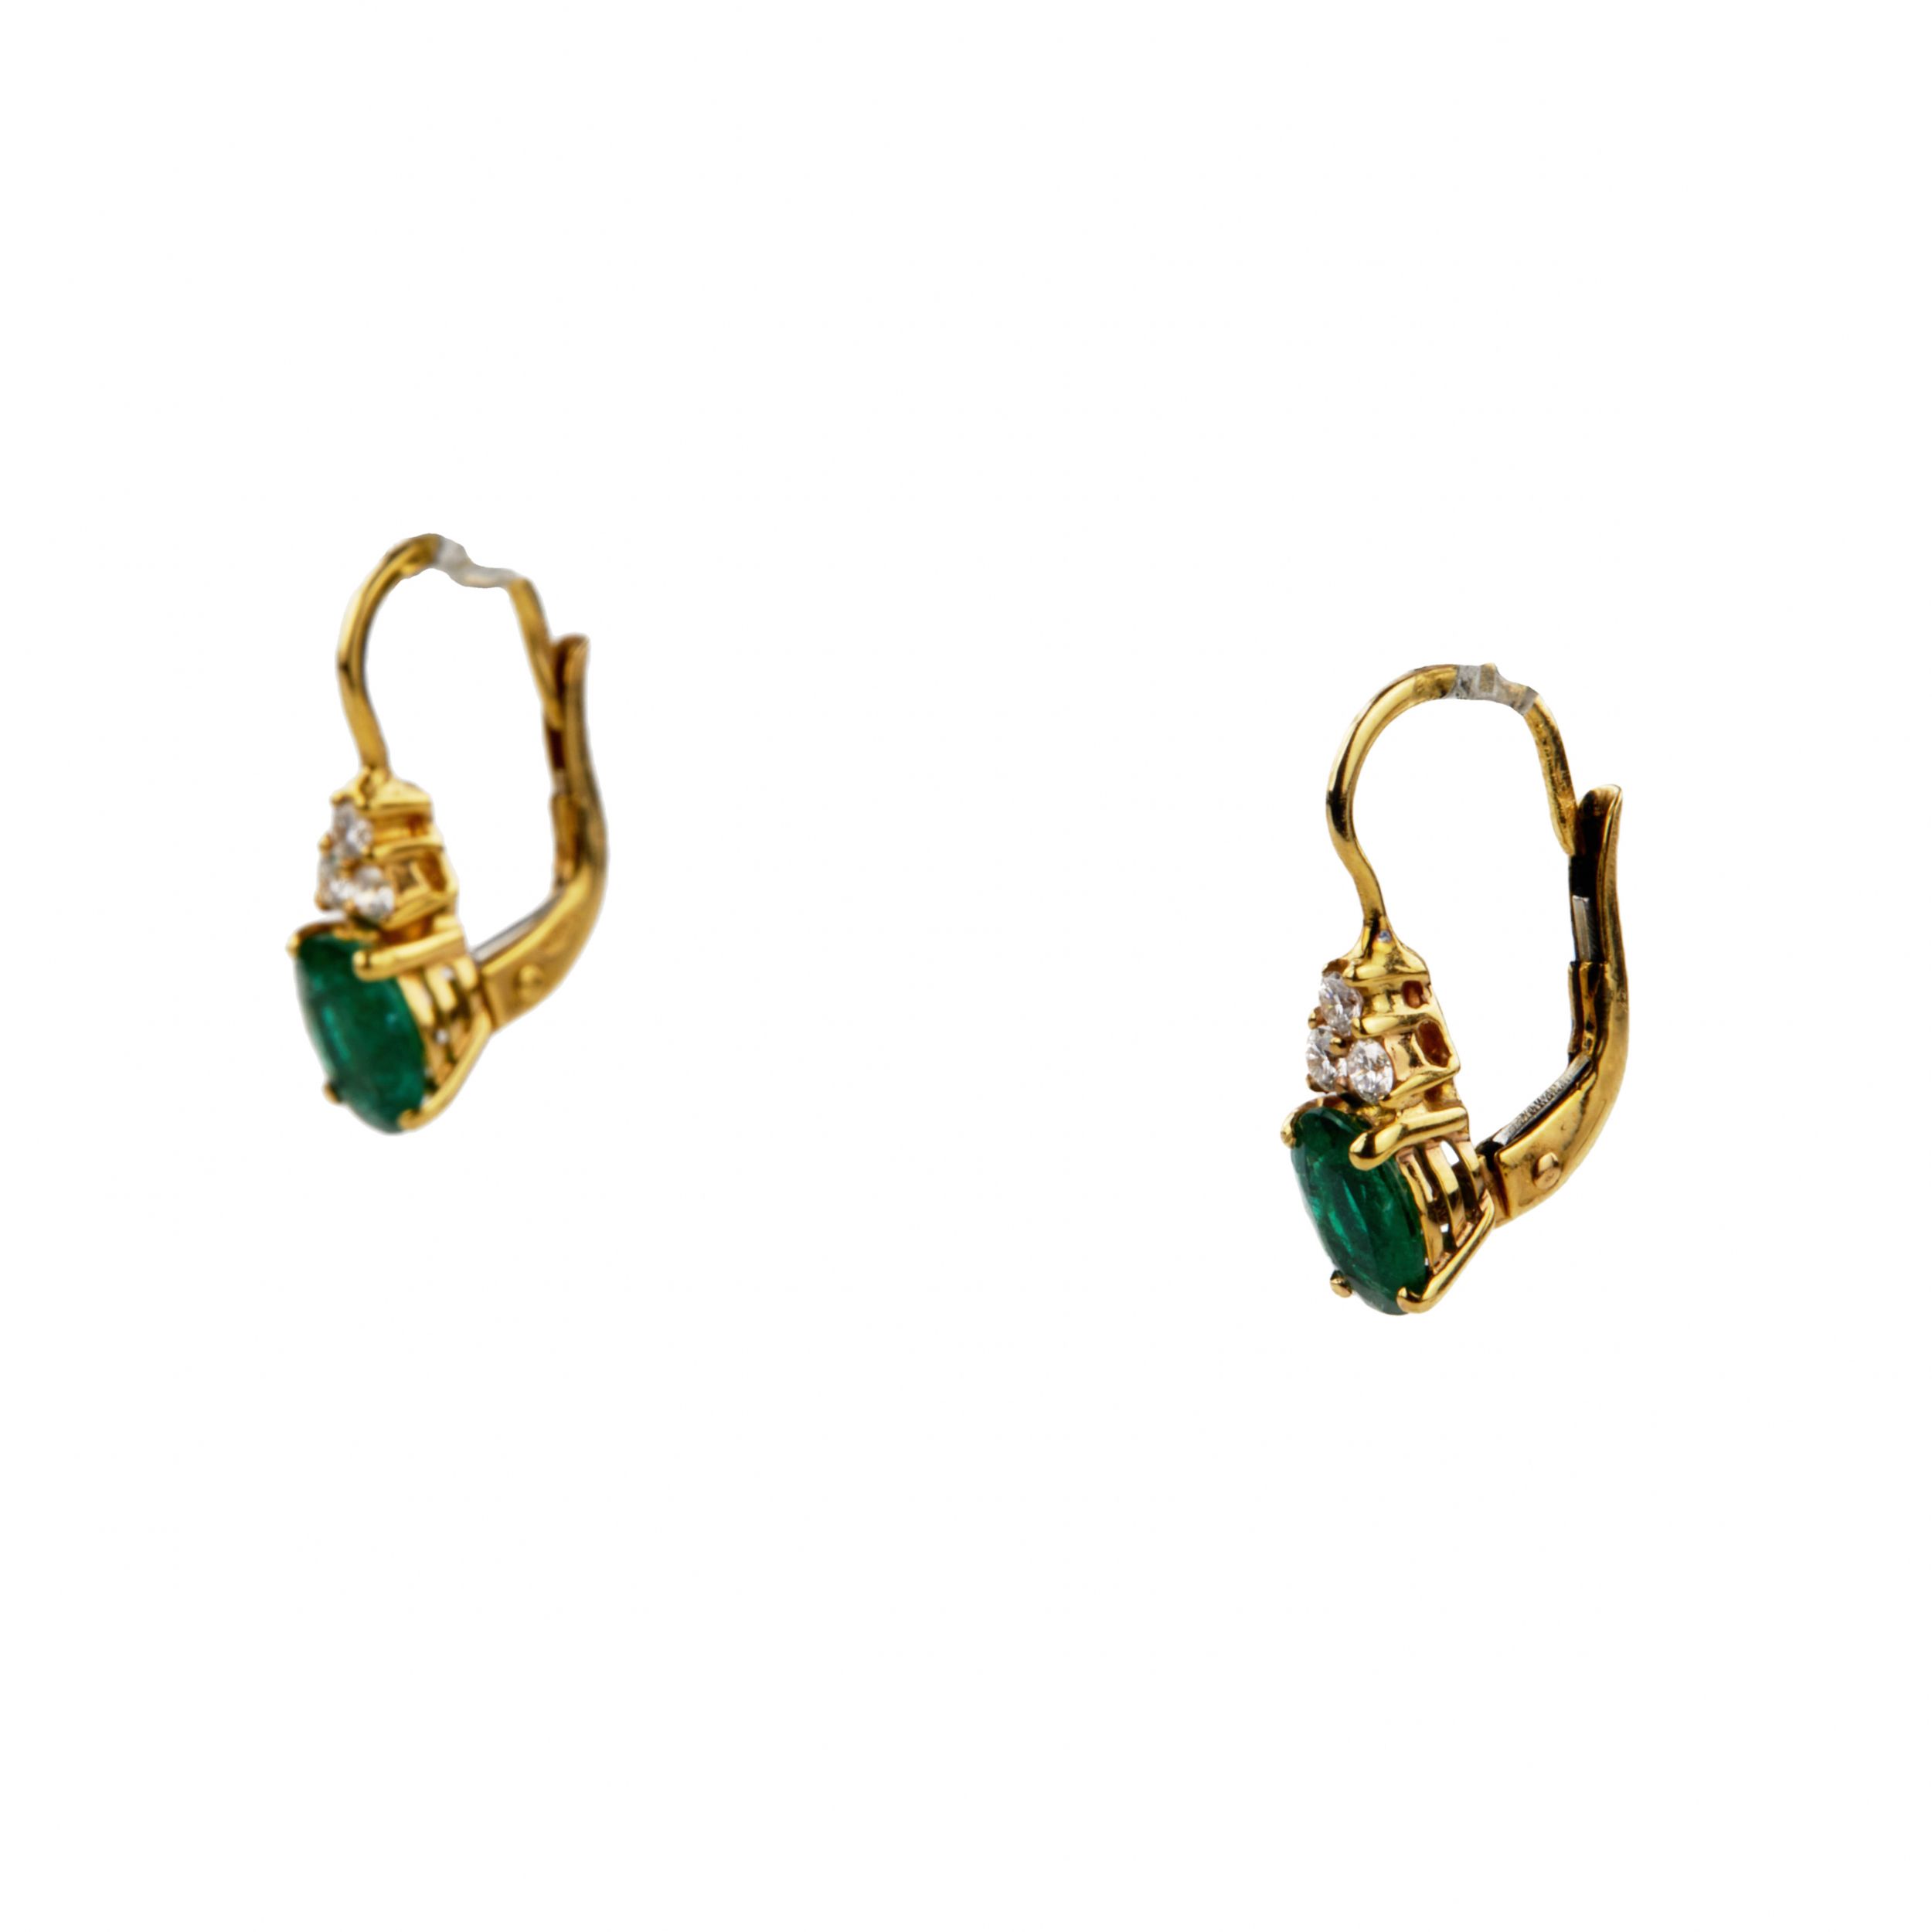 Giorgio Visconti. 18K gold pendant and earrings with emeralds and diamonds. - Image 2 of 8